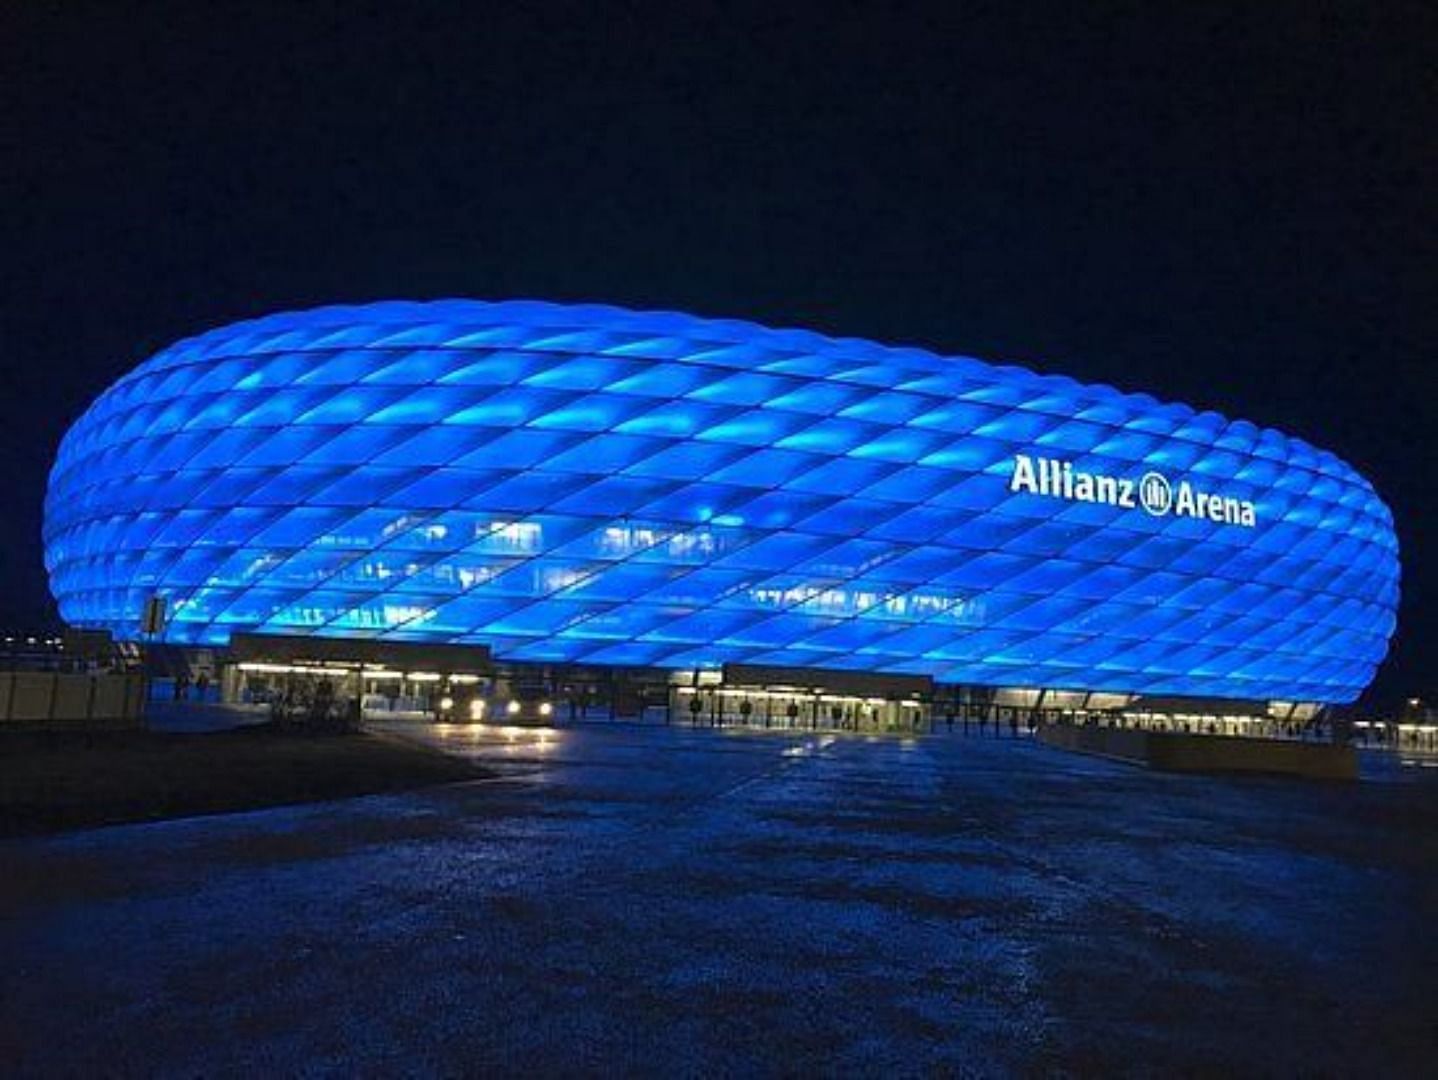 10 most beautiful football stadiums in the world